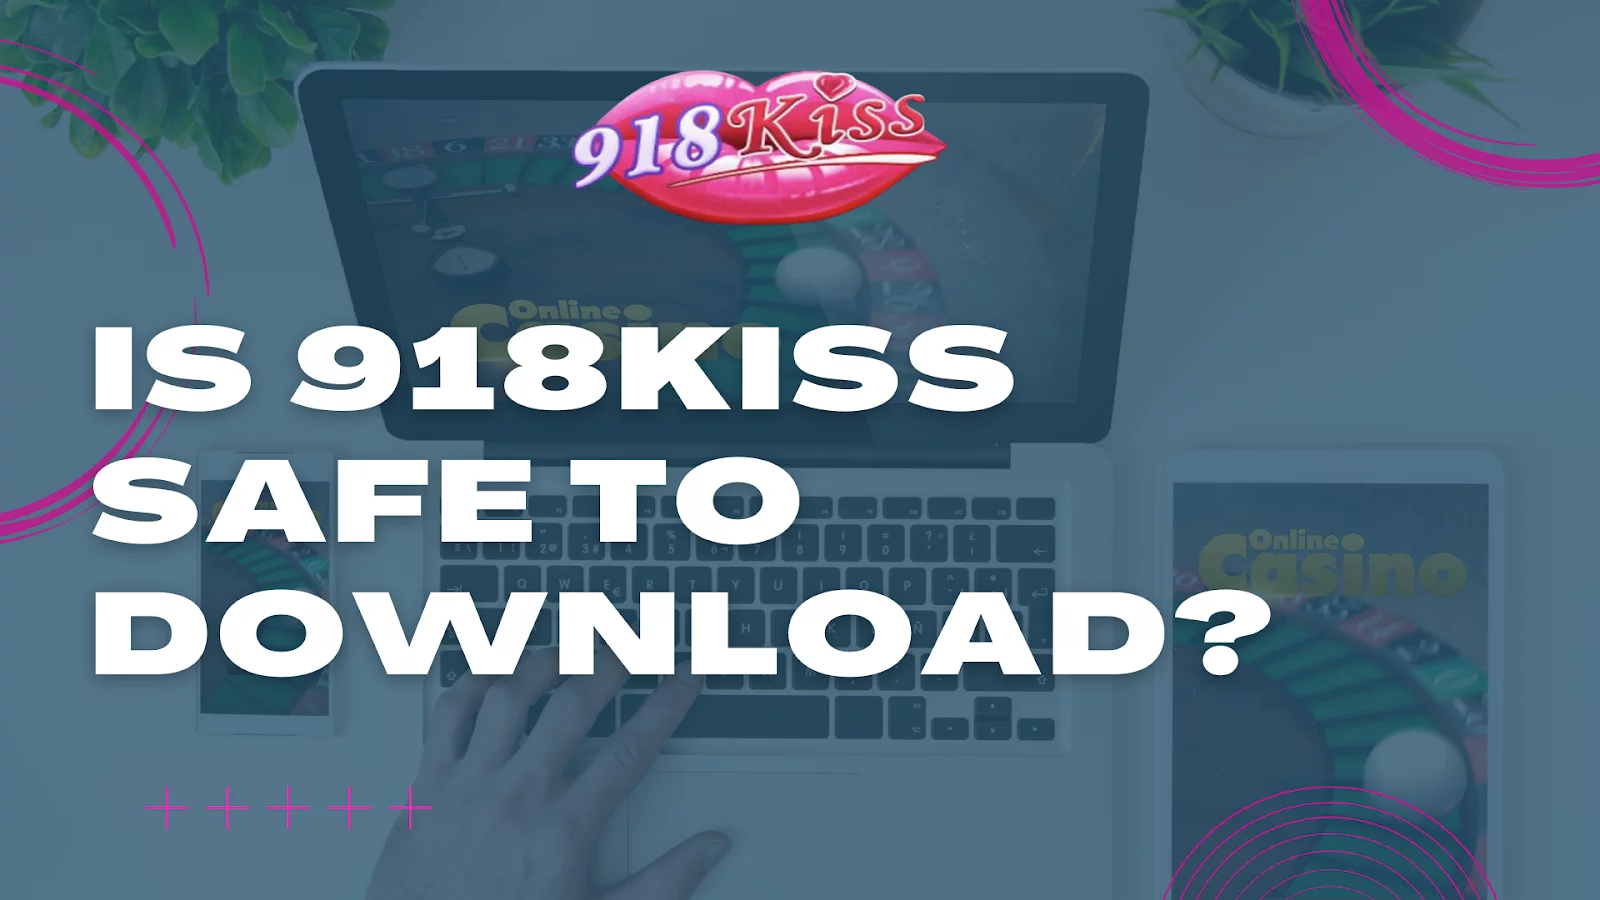 Is 918kiss Safe To Download?